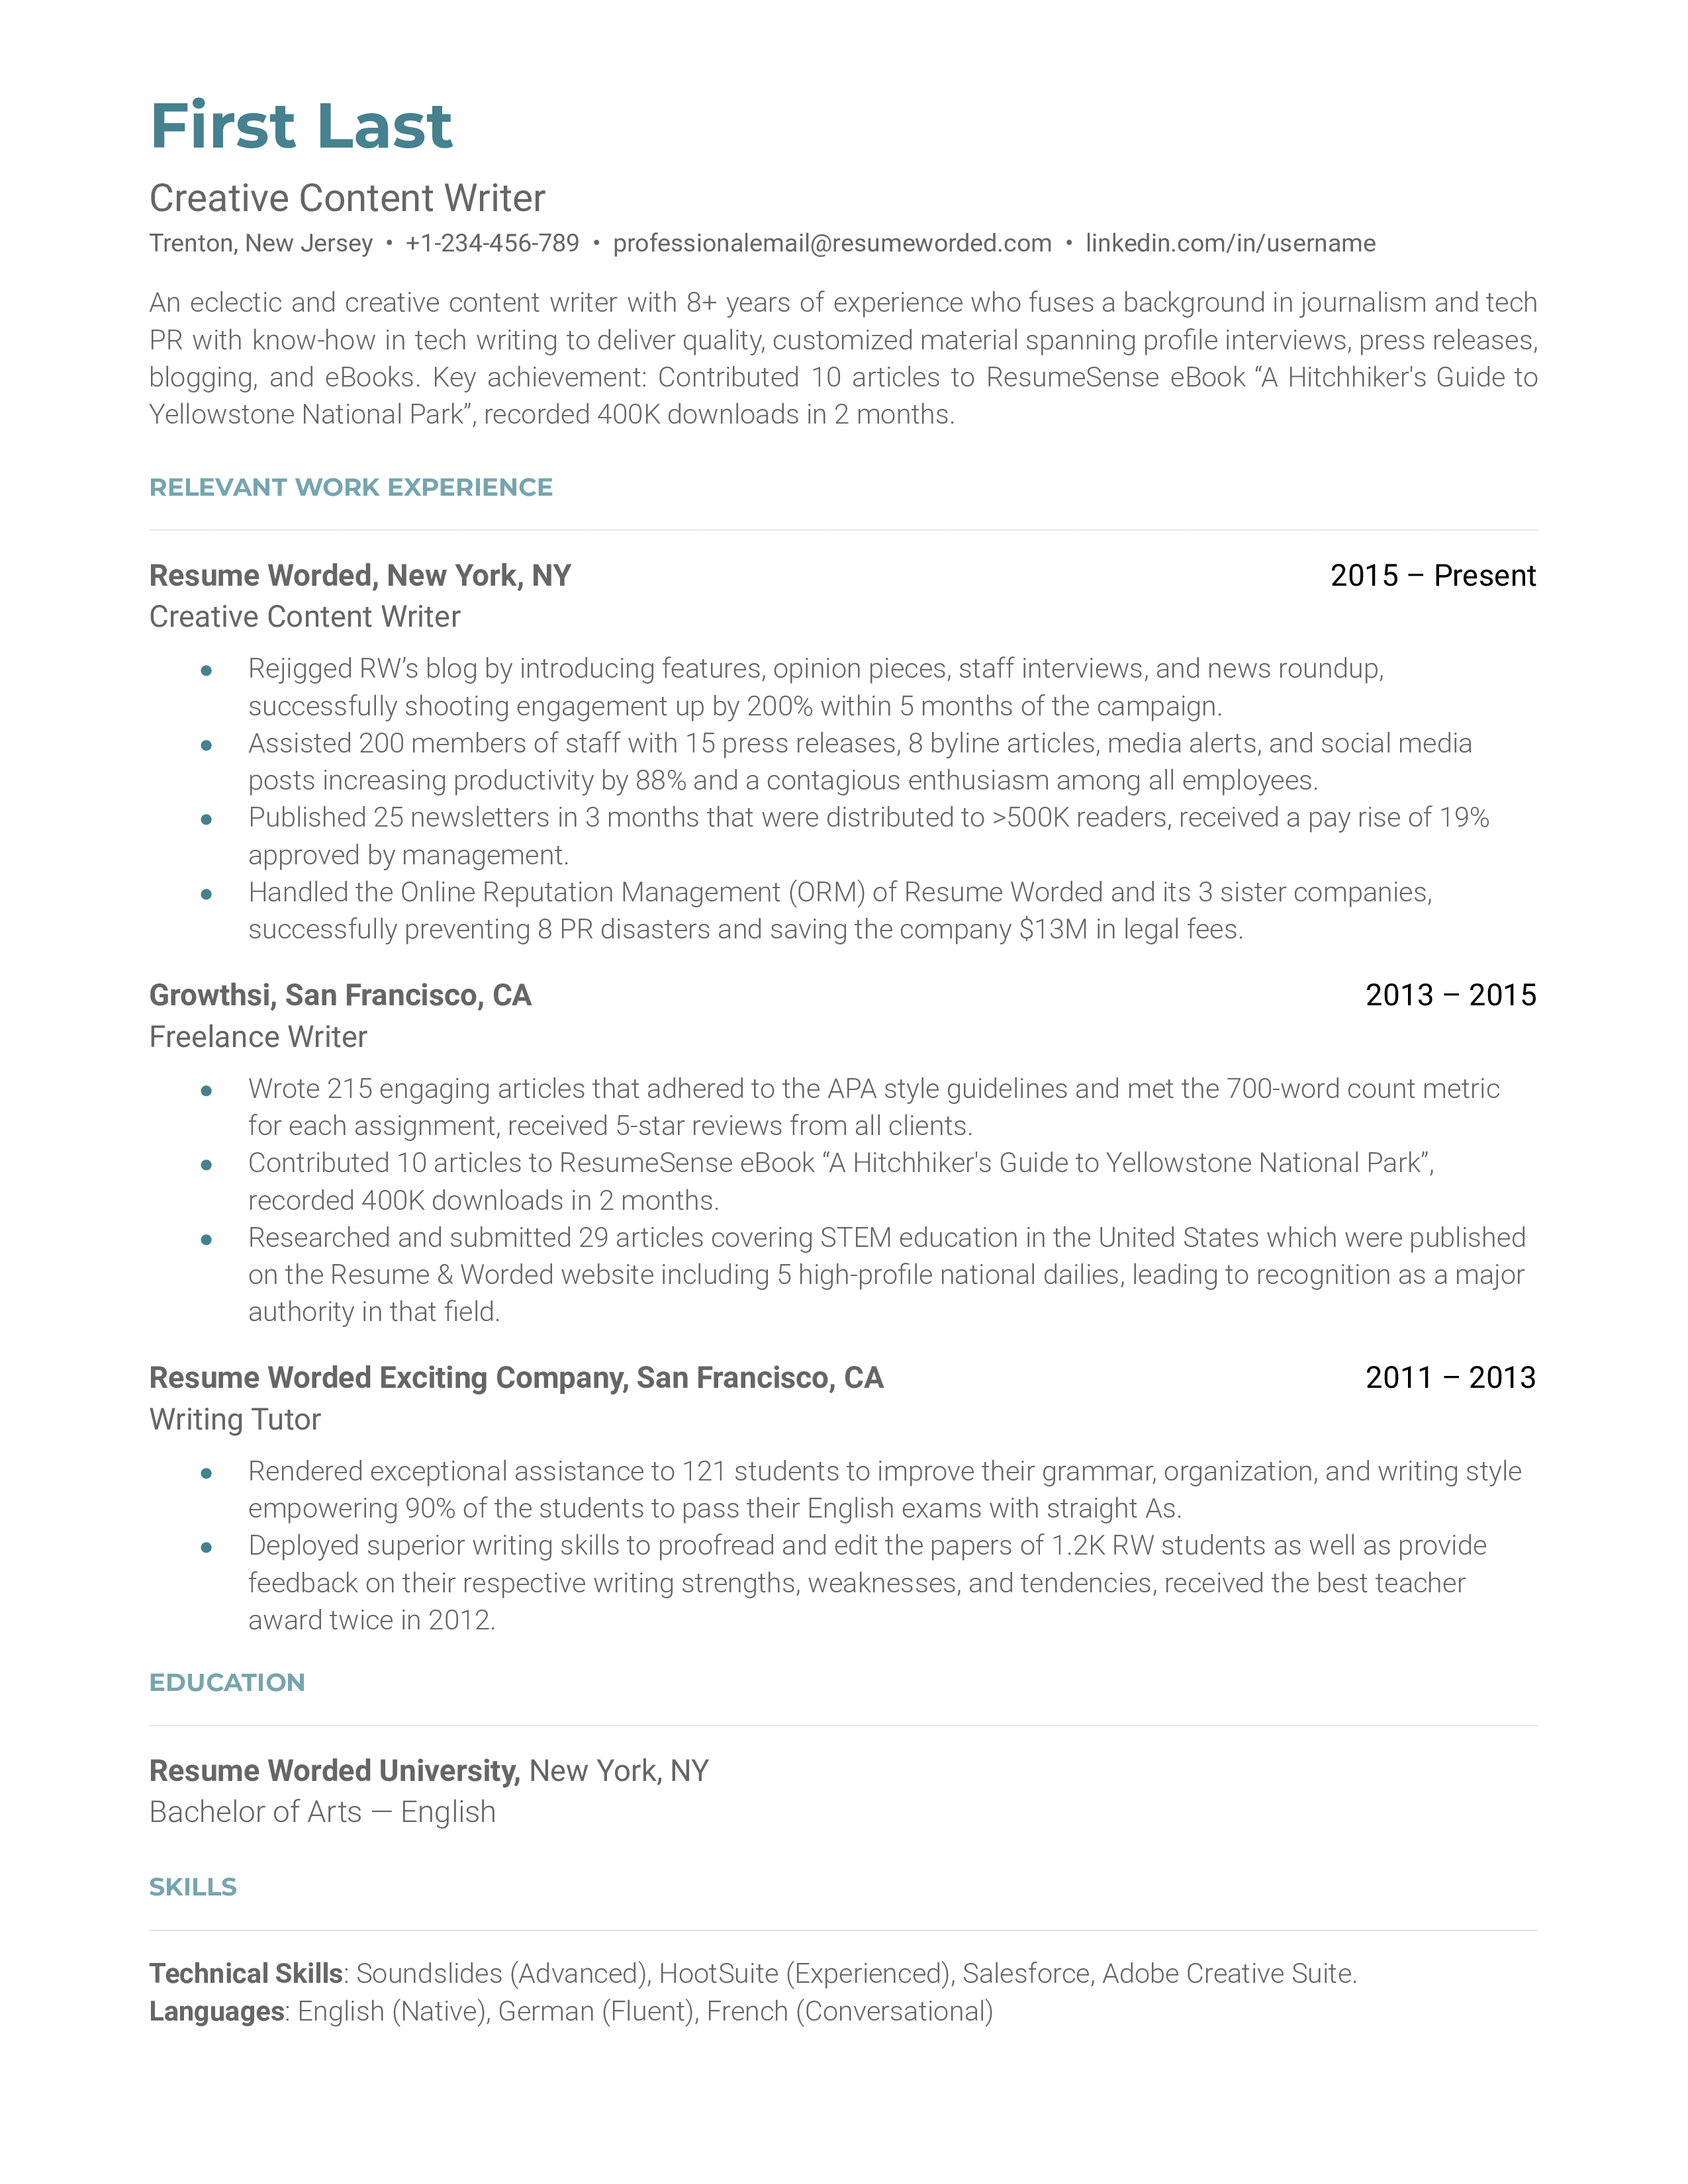 A CV for a creative content writer showcasing their writing skills and impact.